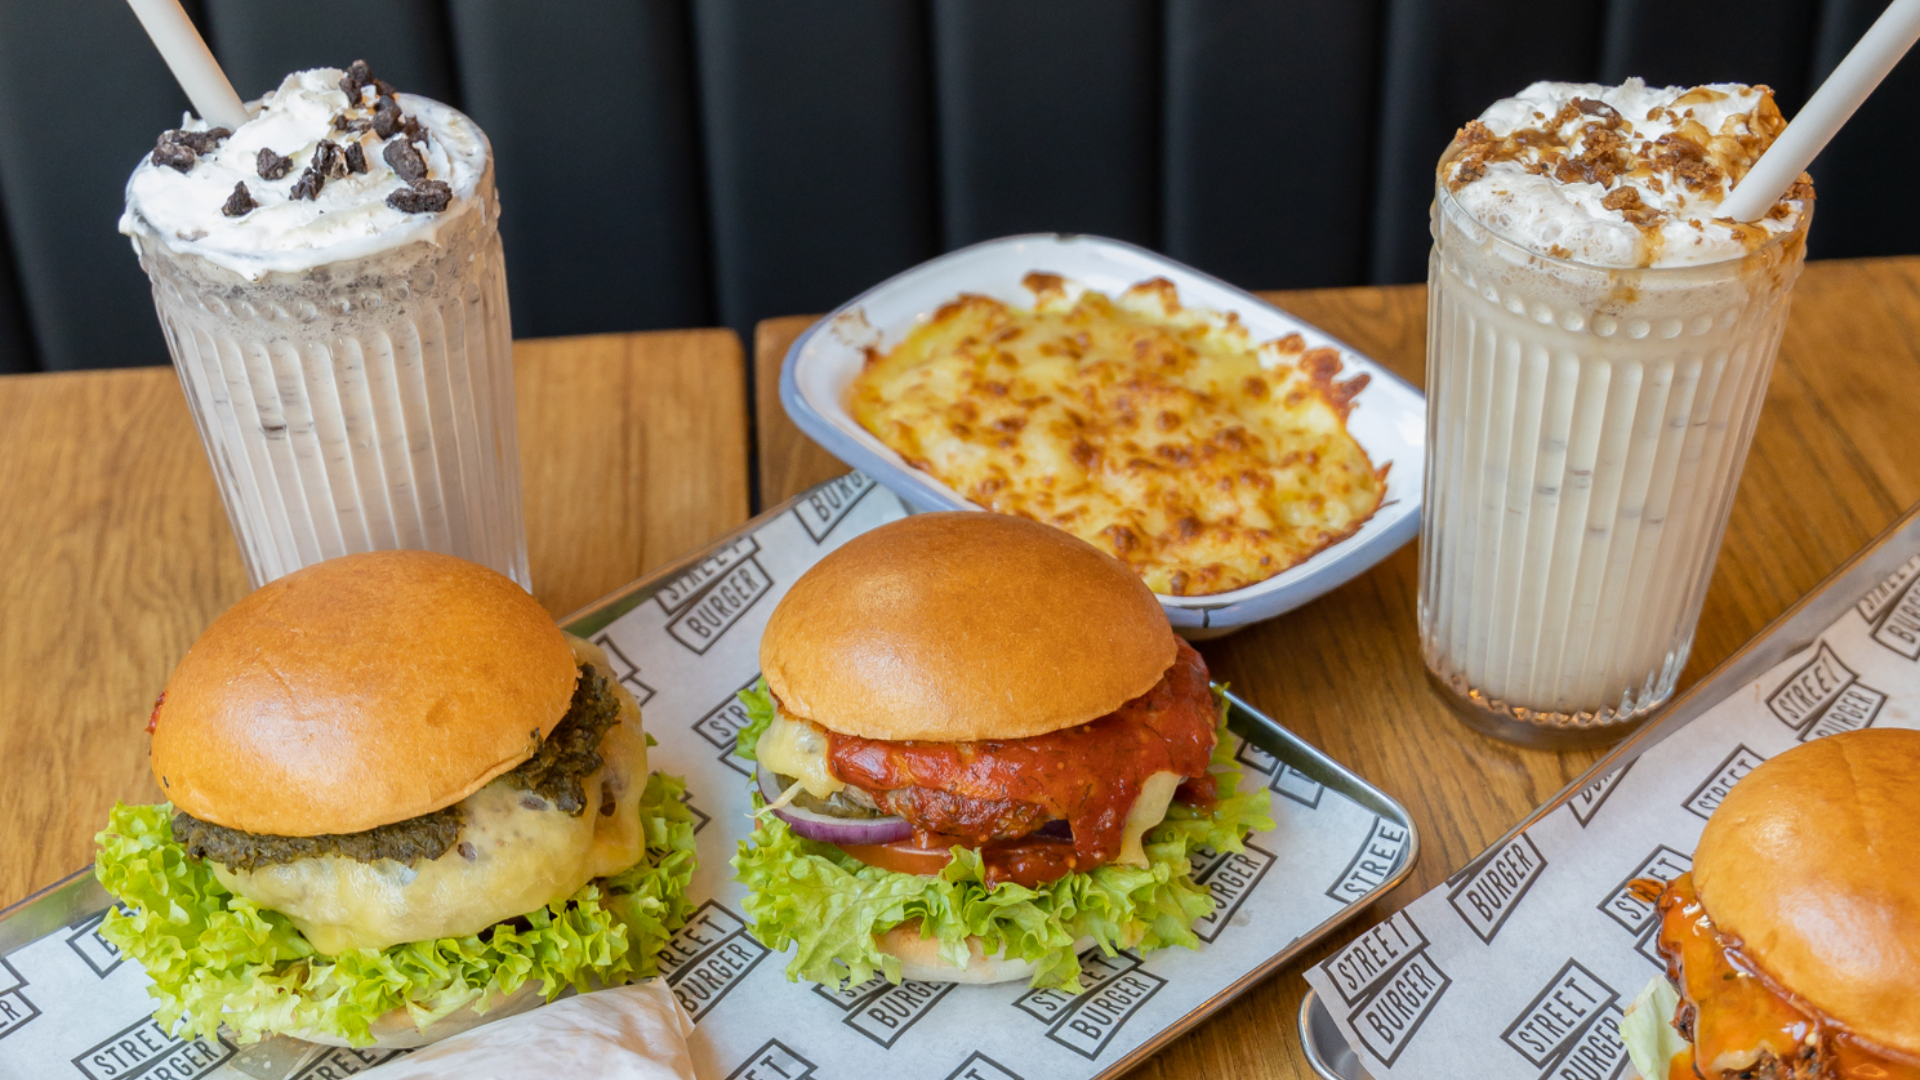 Oreo milkshake and Sticky Toffee Pudding milkshake alongside mac and cheese, O.G.R beef burger and Where's The Lamb burger on tray with seasoned Koffmann's Fries.